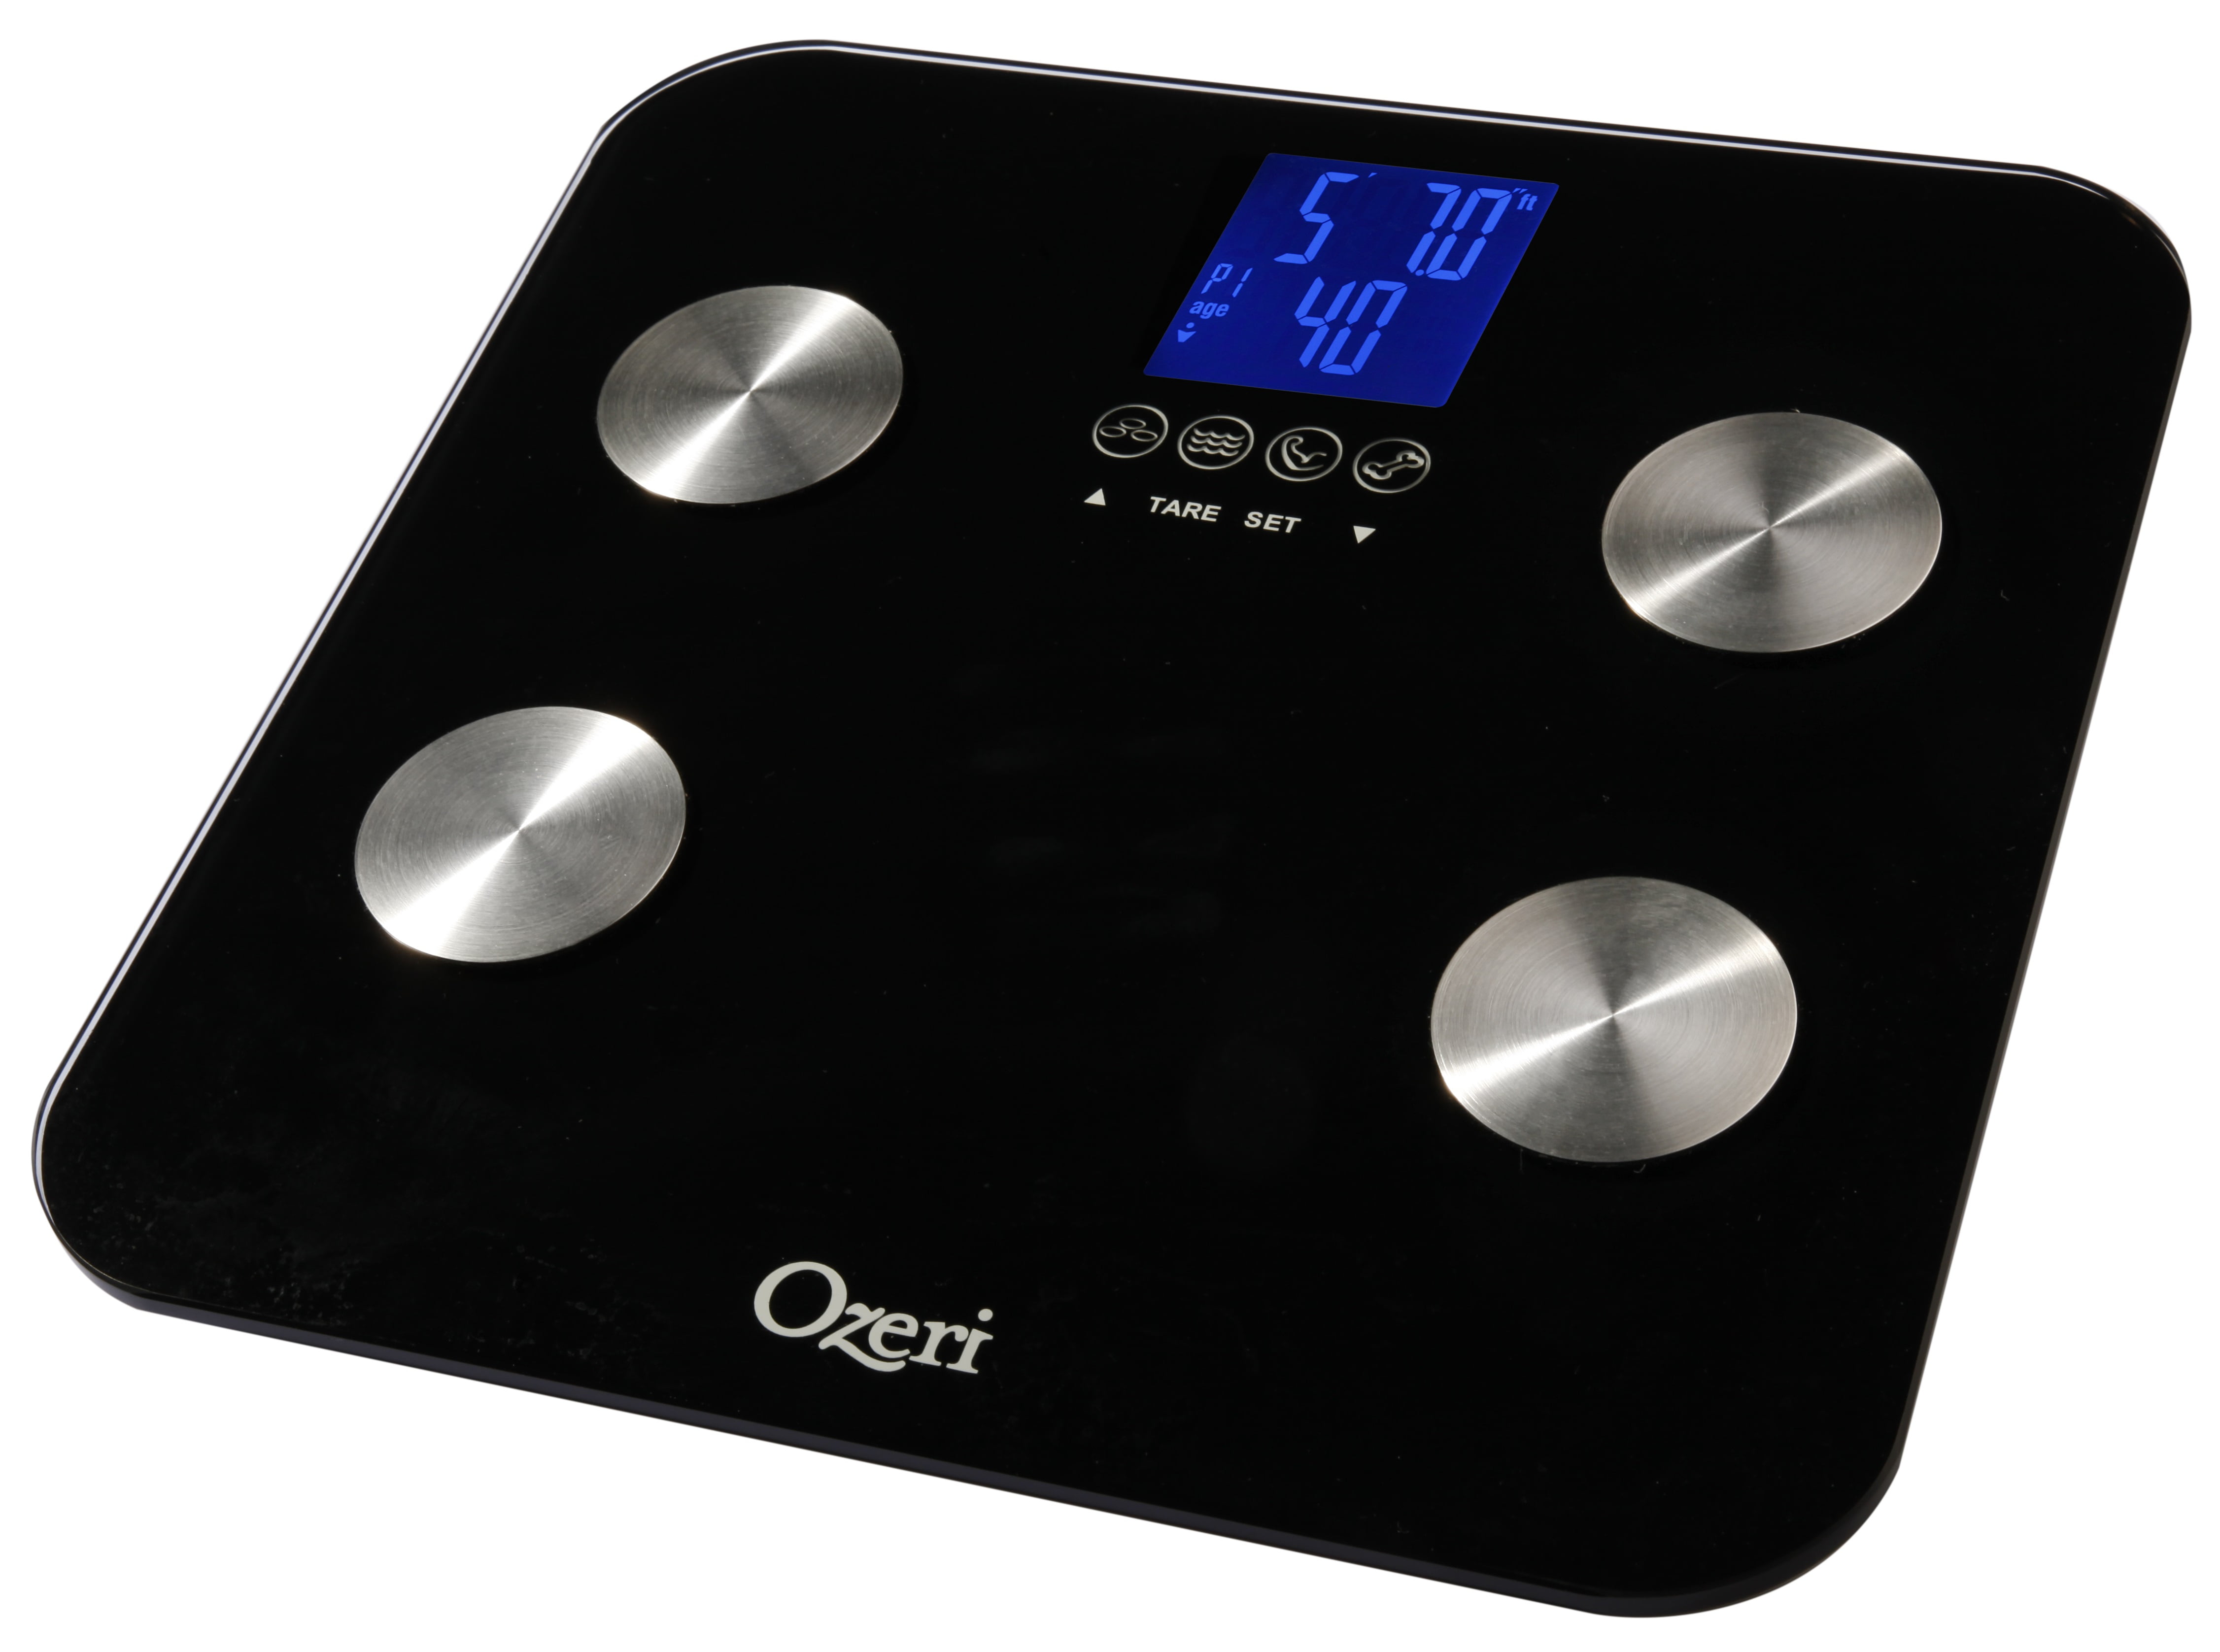 Ozeri Precision Bath Scale (440 lbs) in Tempered Glass, with 50 Gram (0.1 lbs) Sensor Technology and Infant, Pet & Luggage Tare, White